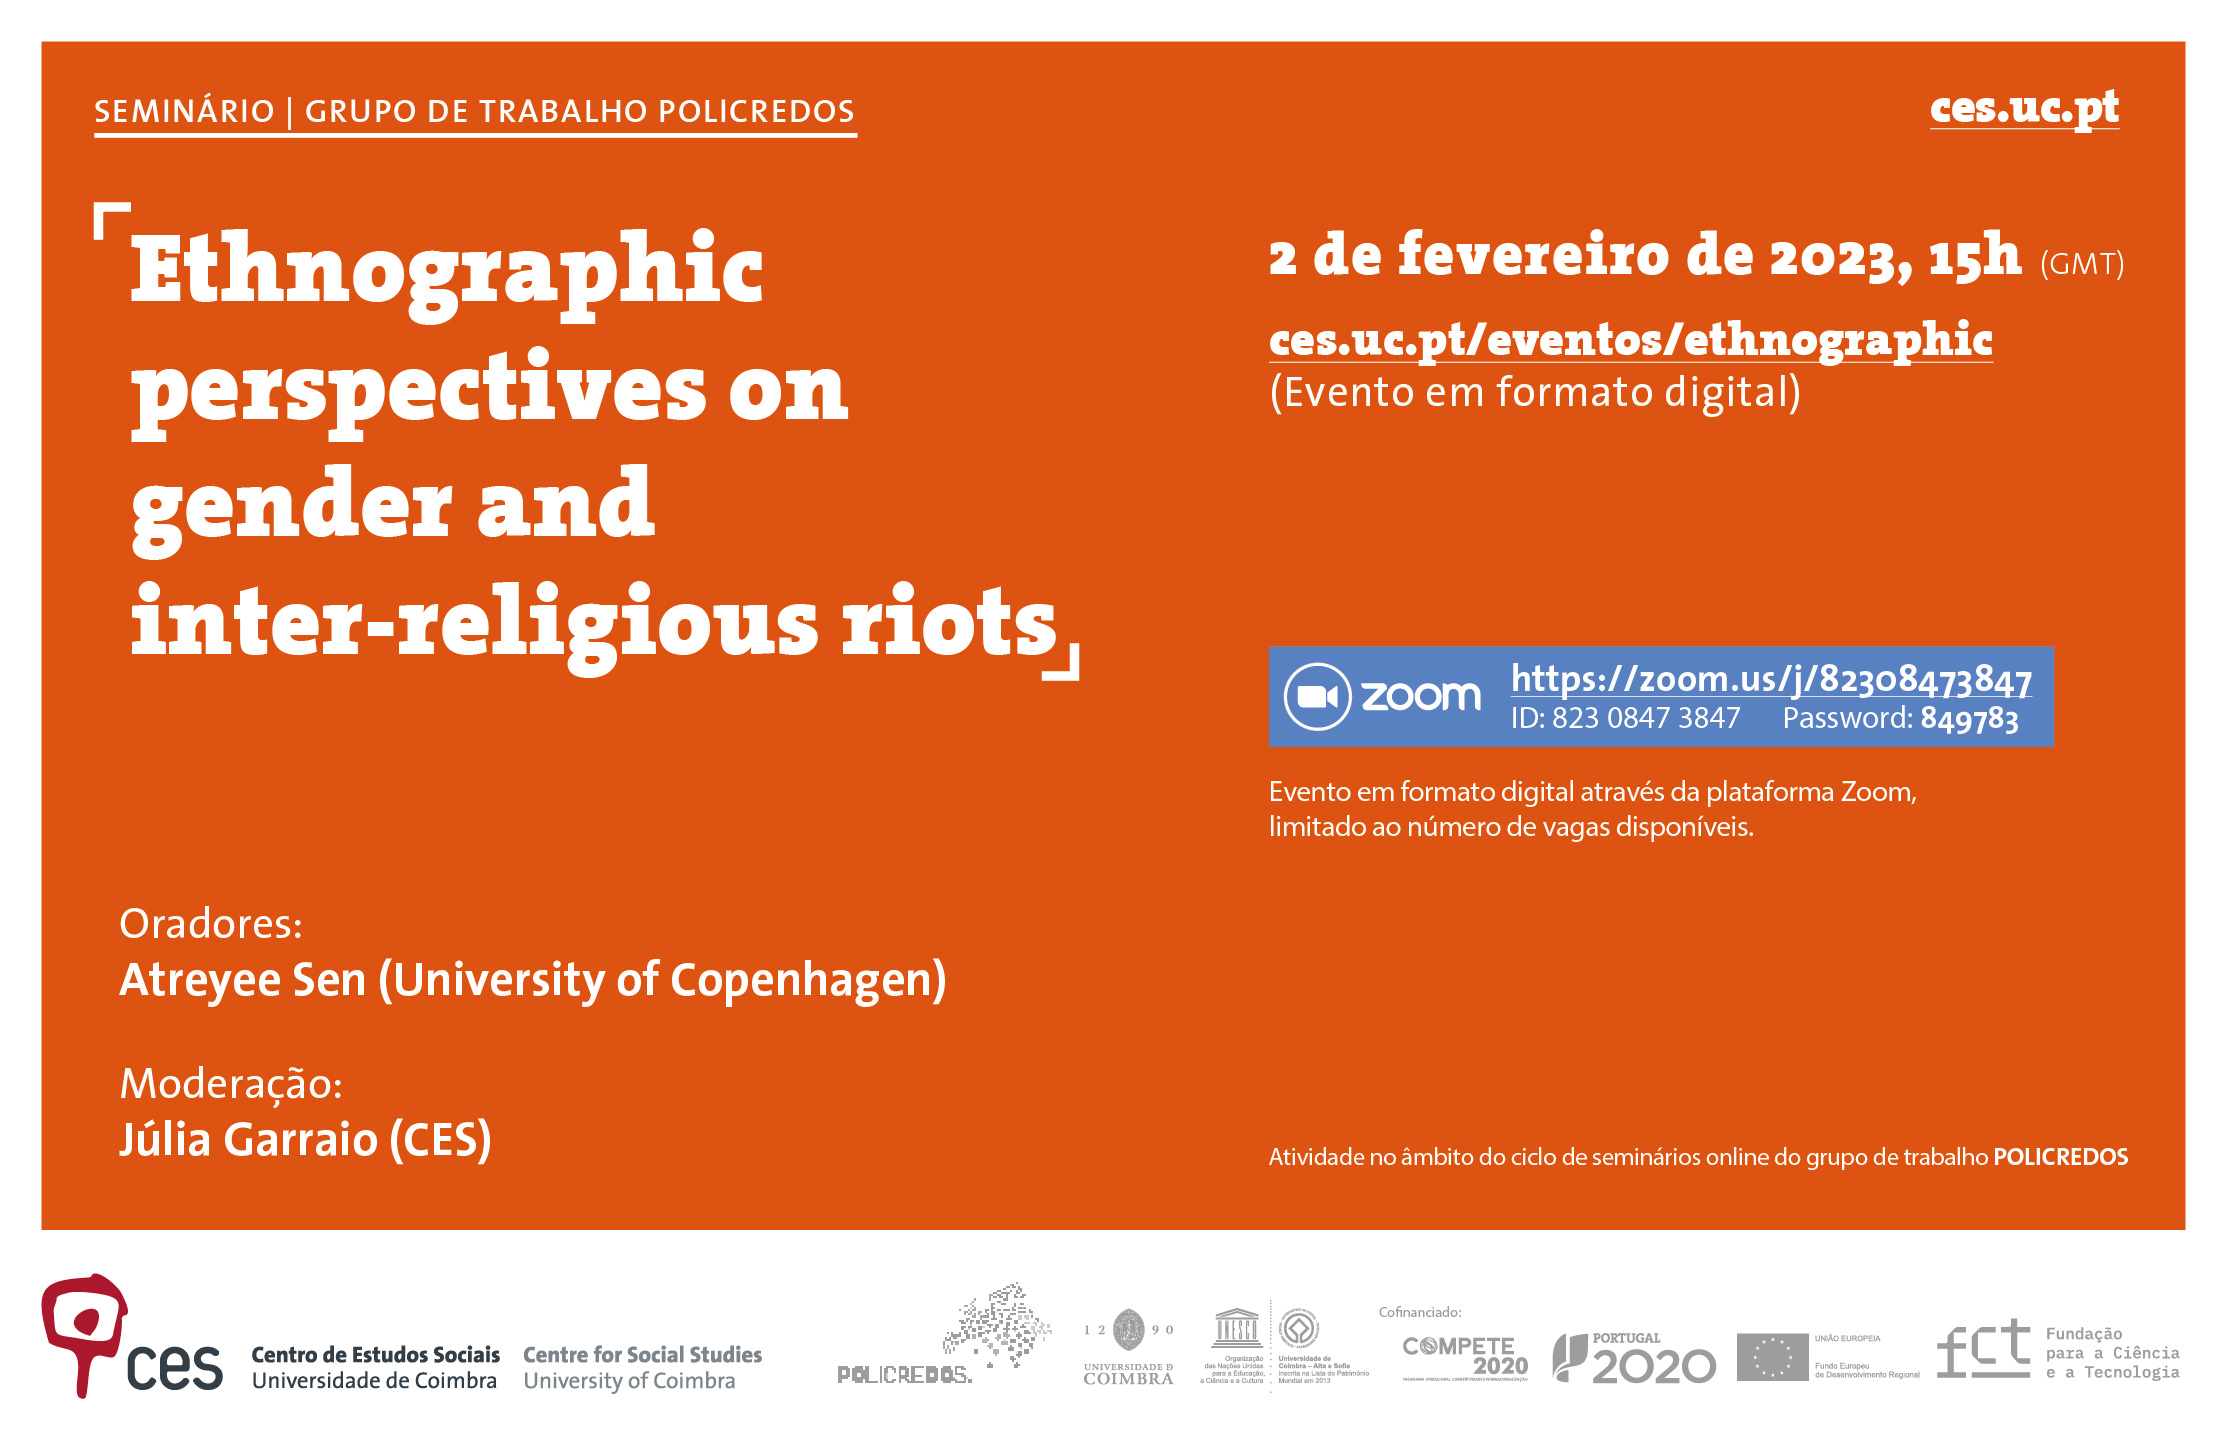 Ethnographic perspectives on gender and inter-religious riots<span id="edit_40732"><script>$(function() { $('#edit_40732').load( "/myces/user/editobj.php?tipo=evento&id=40732" ); });</script></span>